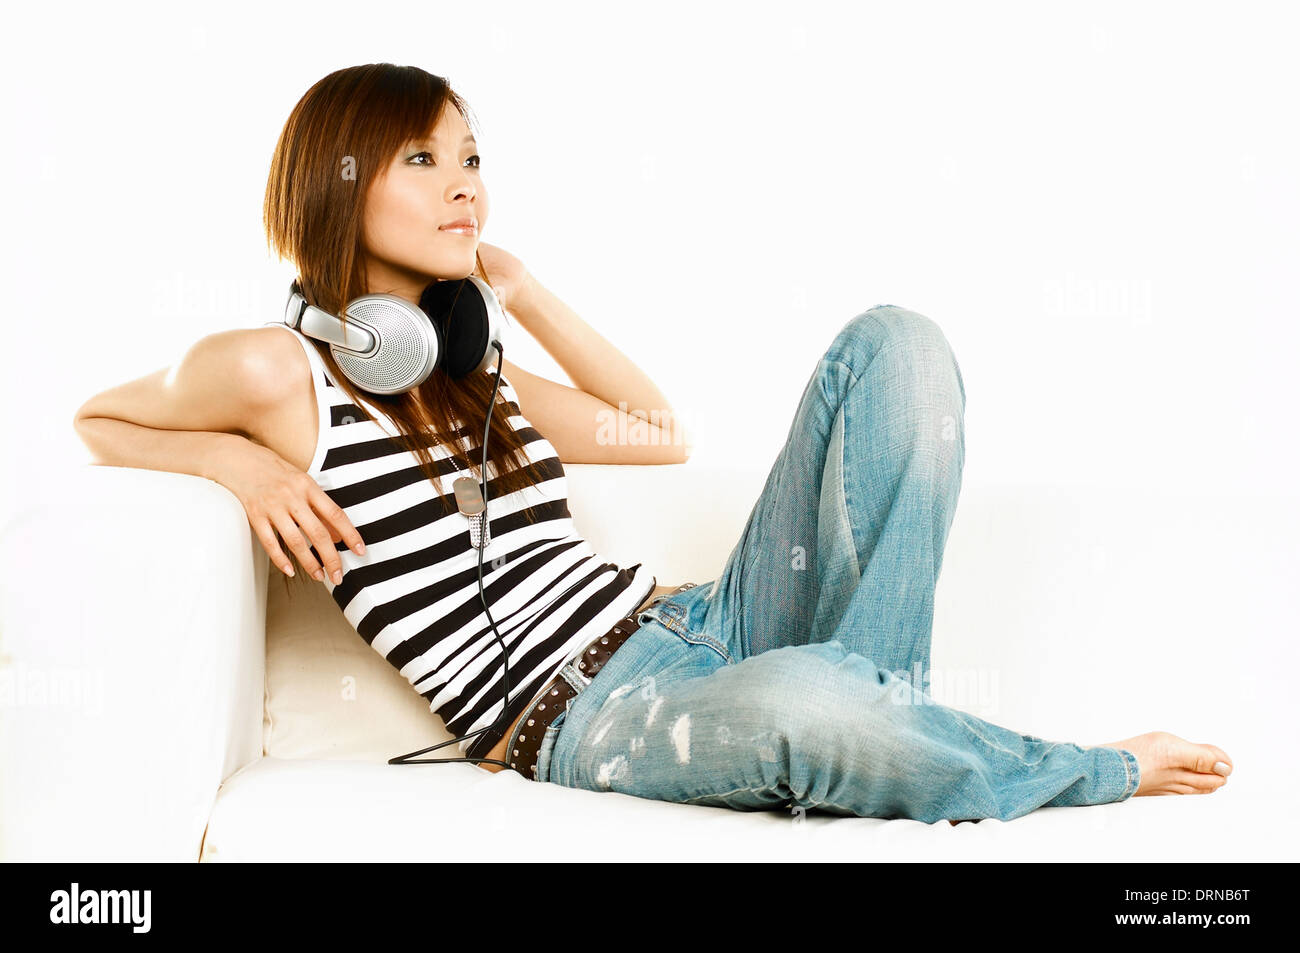 Listening to the music Stock Photo